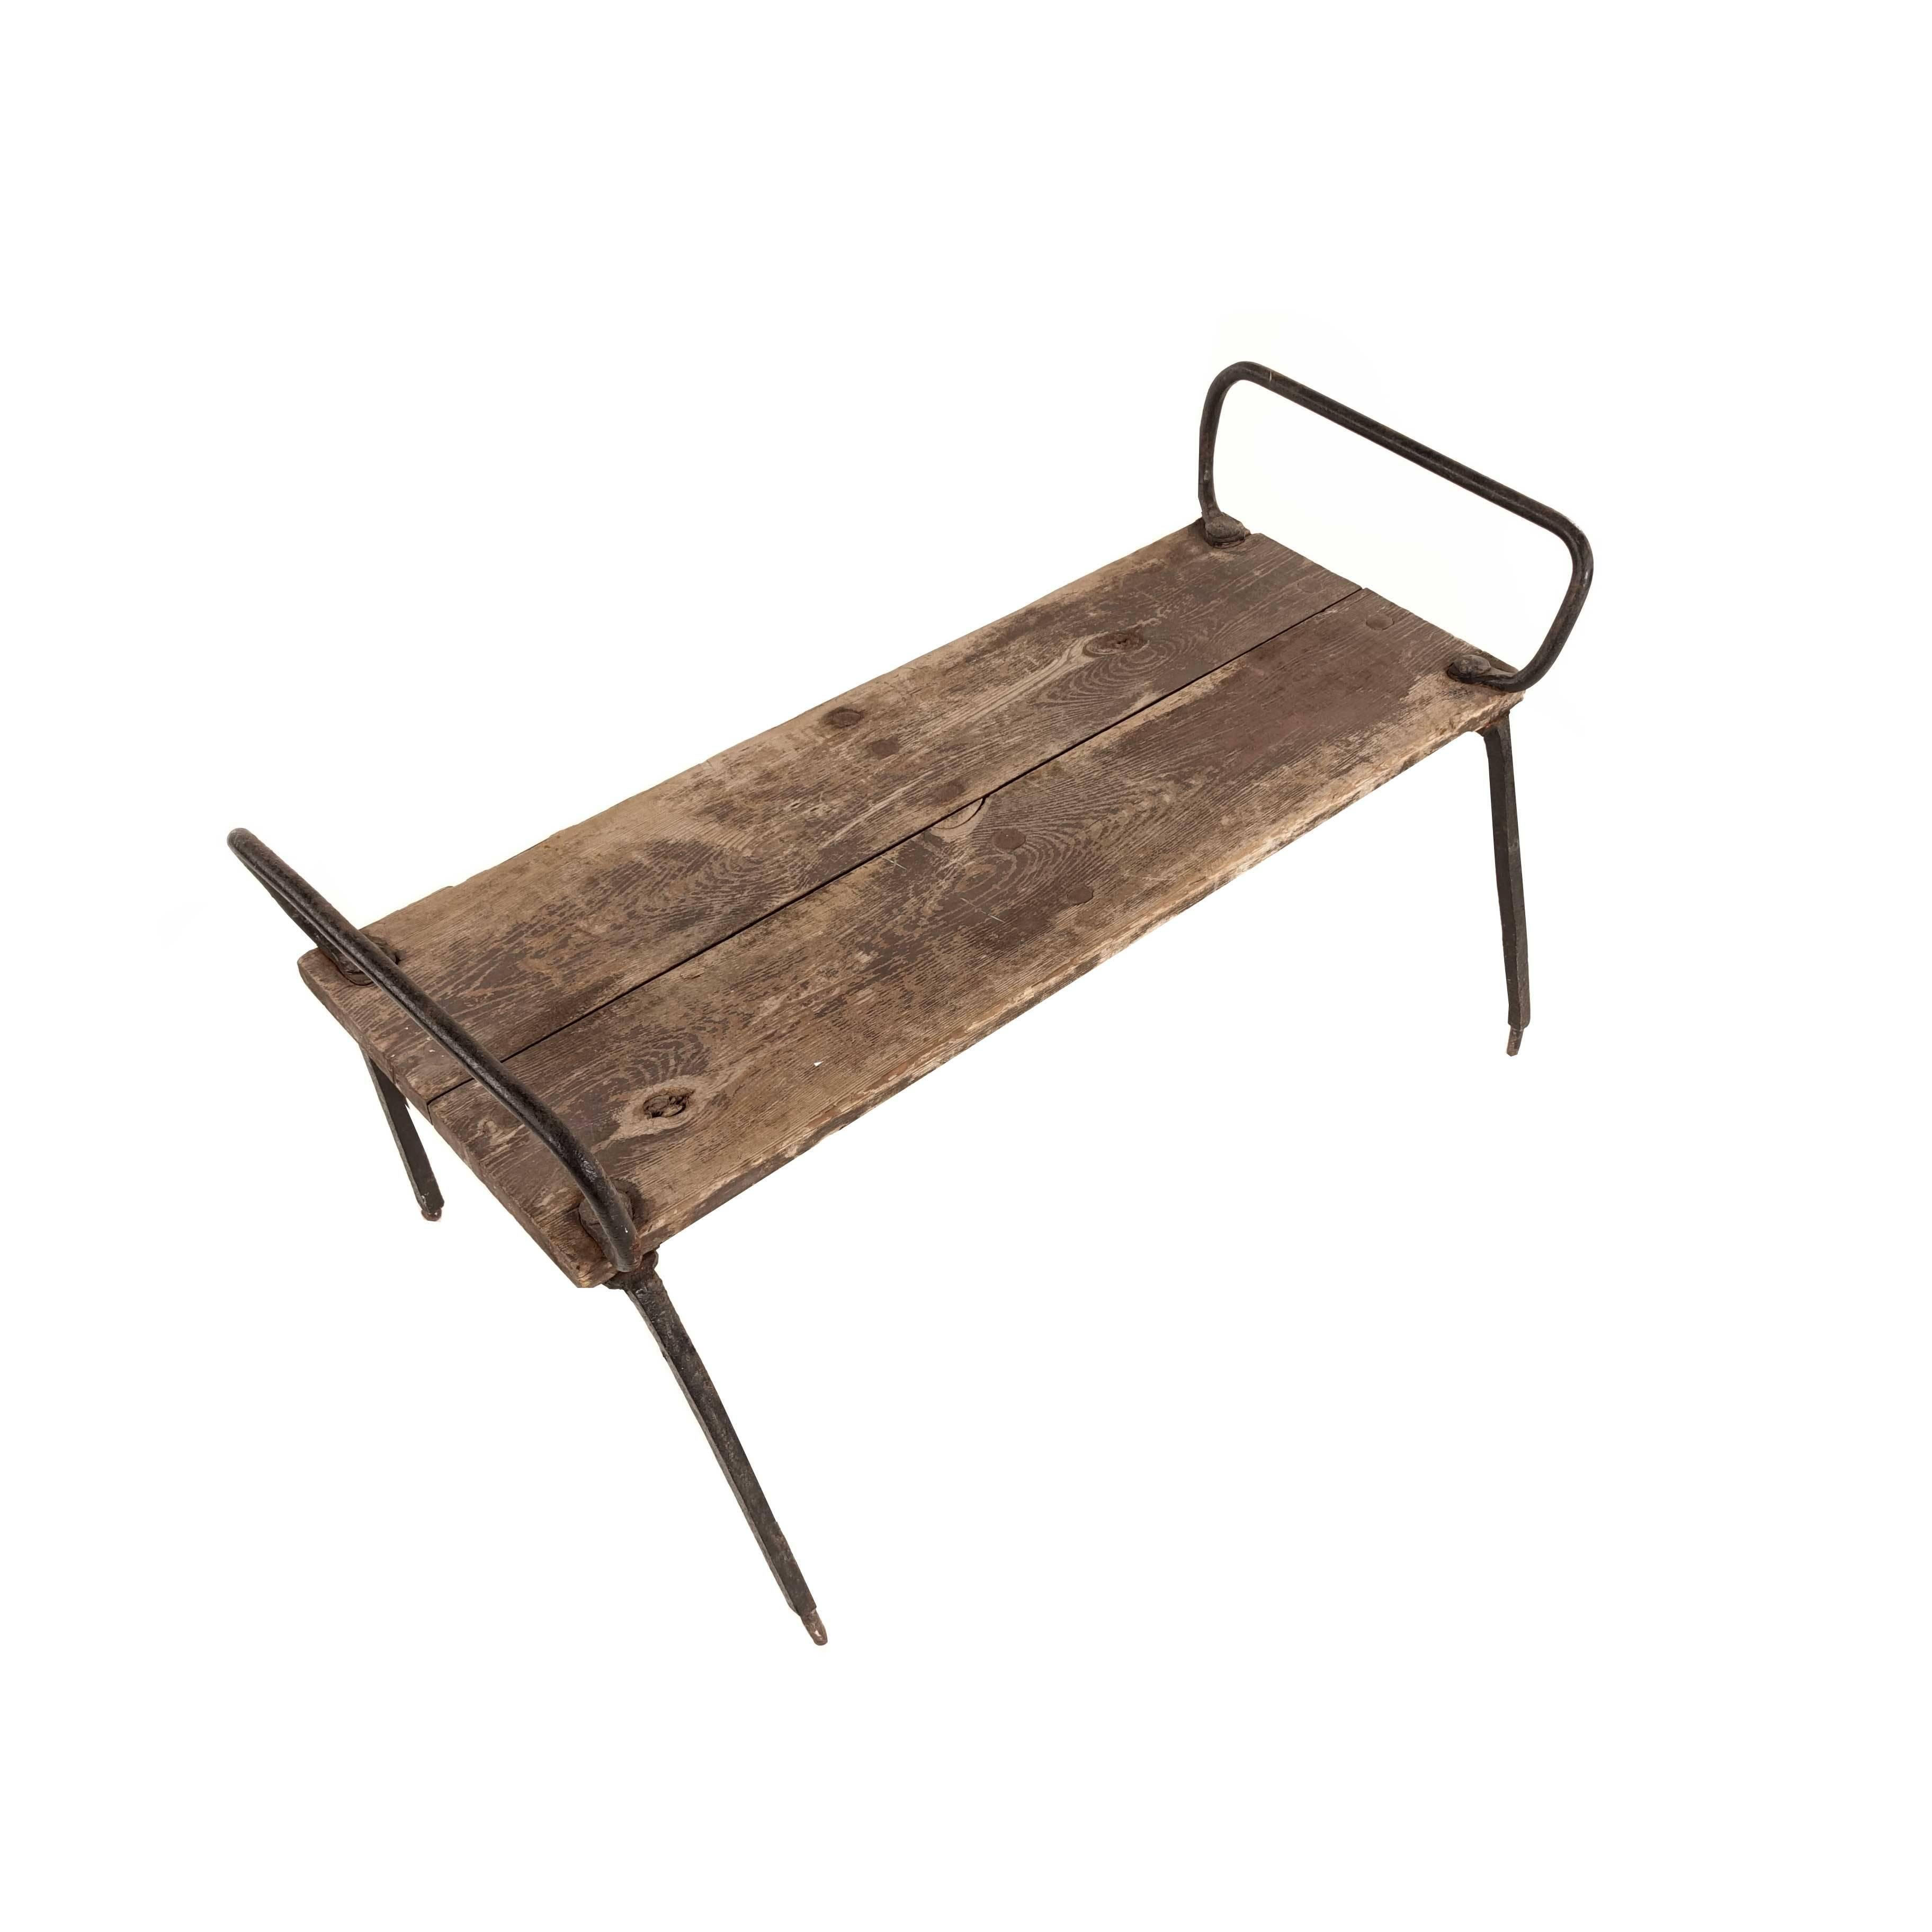 The most stunning patina on this checkmark that can be used as a bench, table or sideboard.